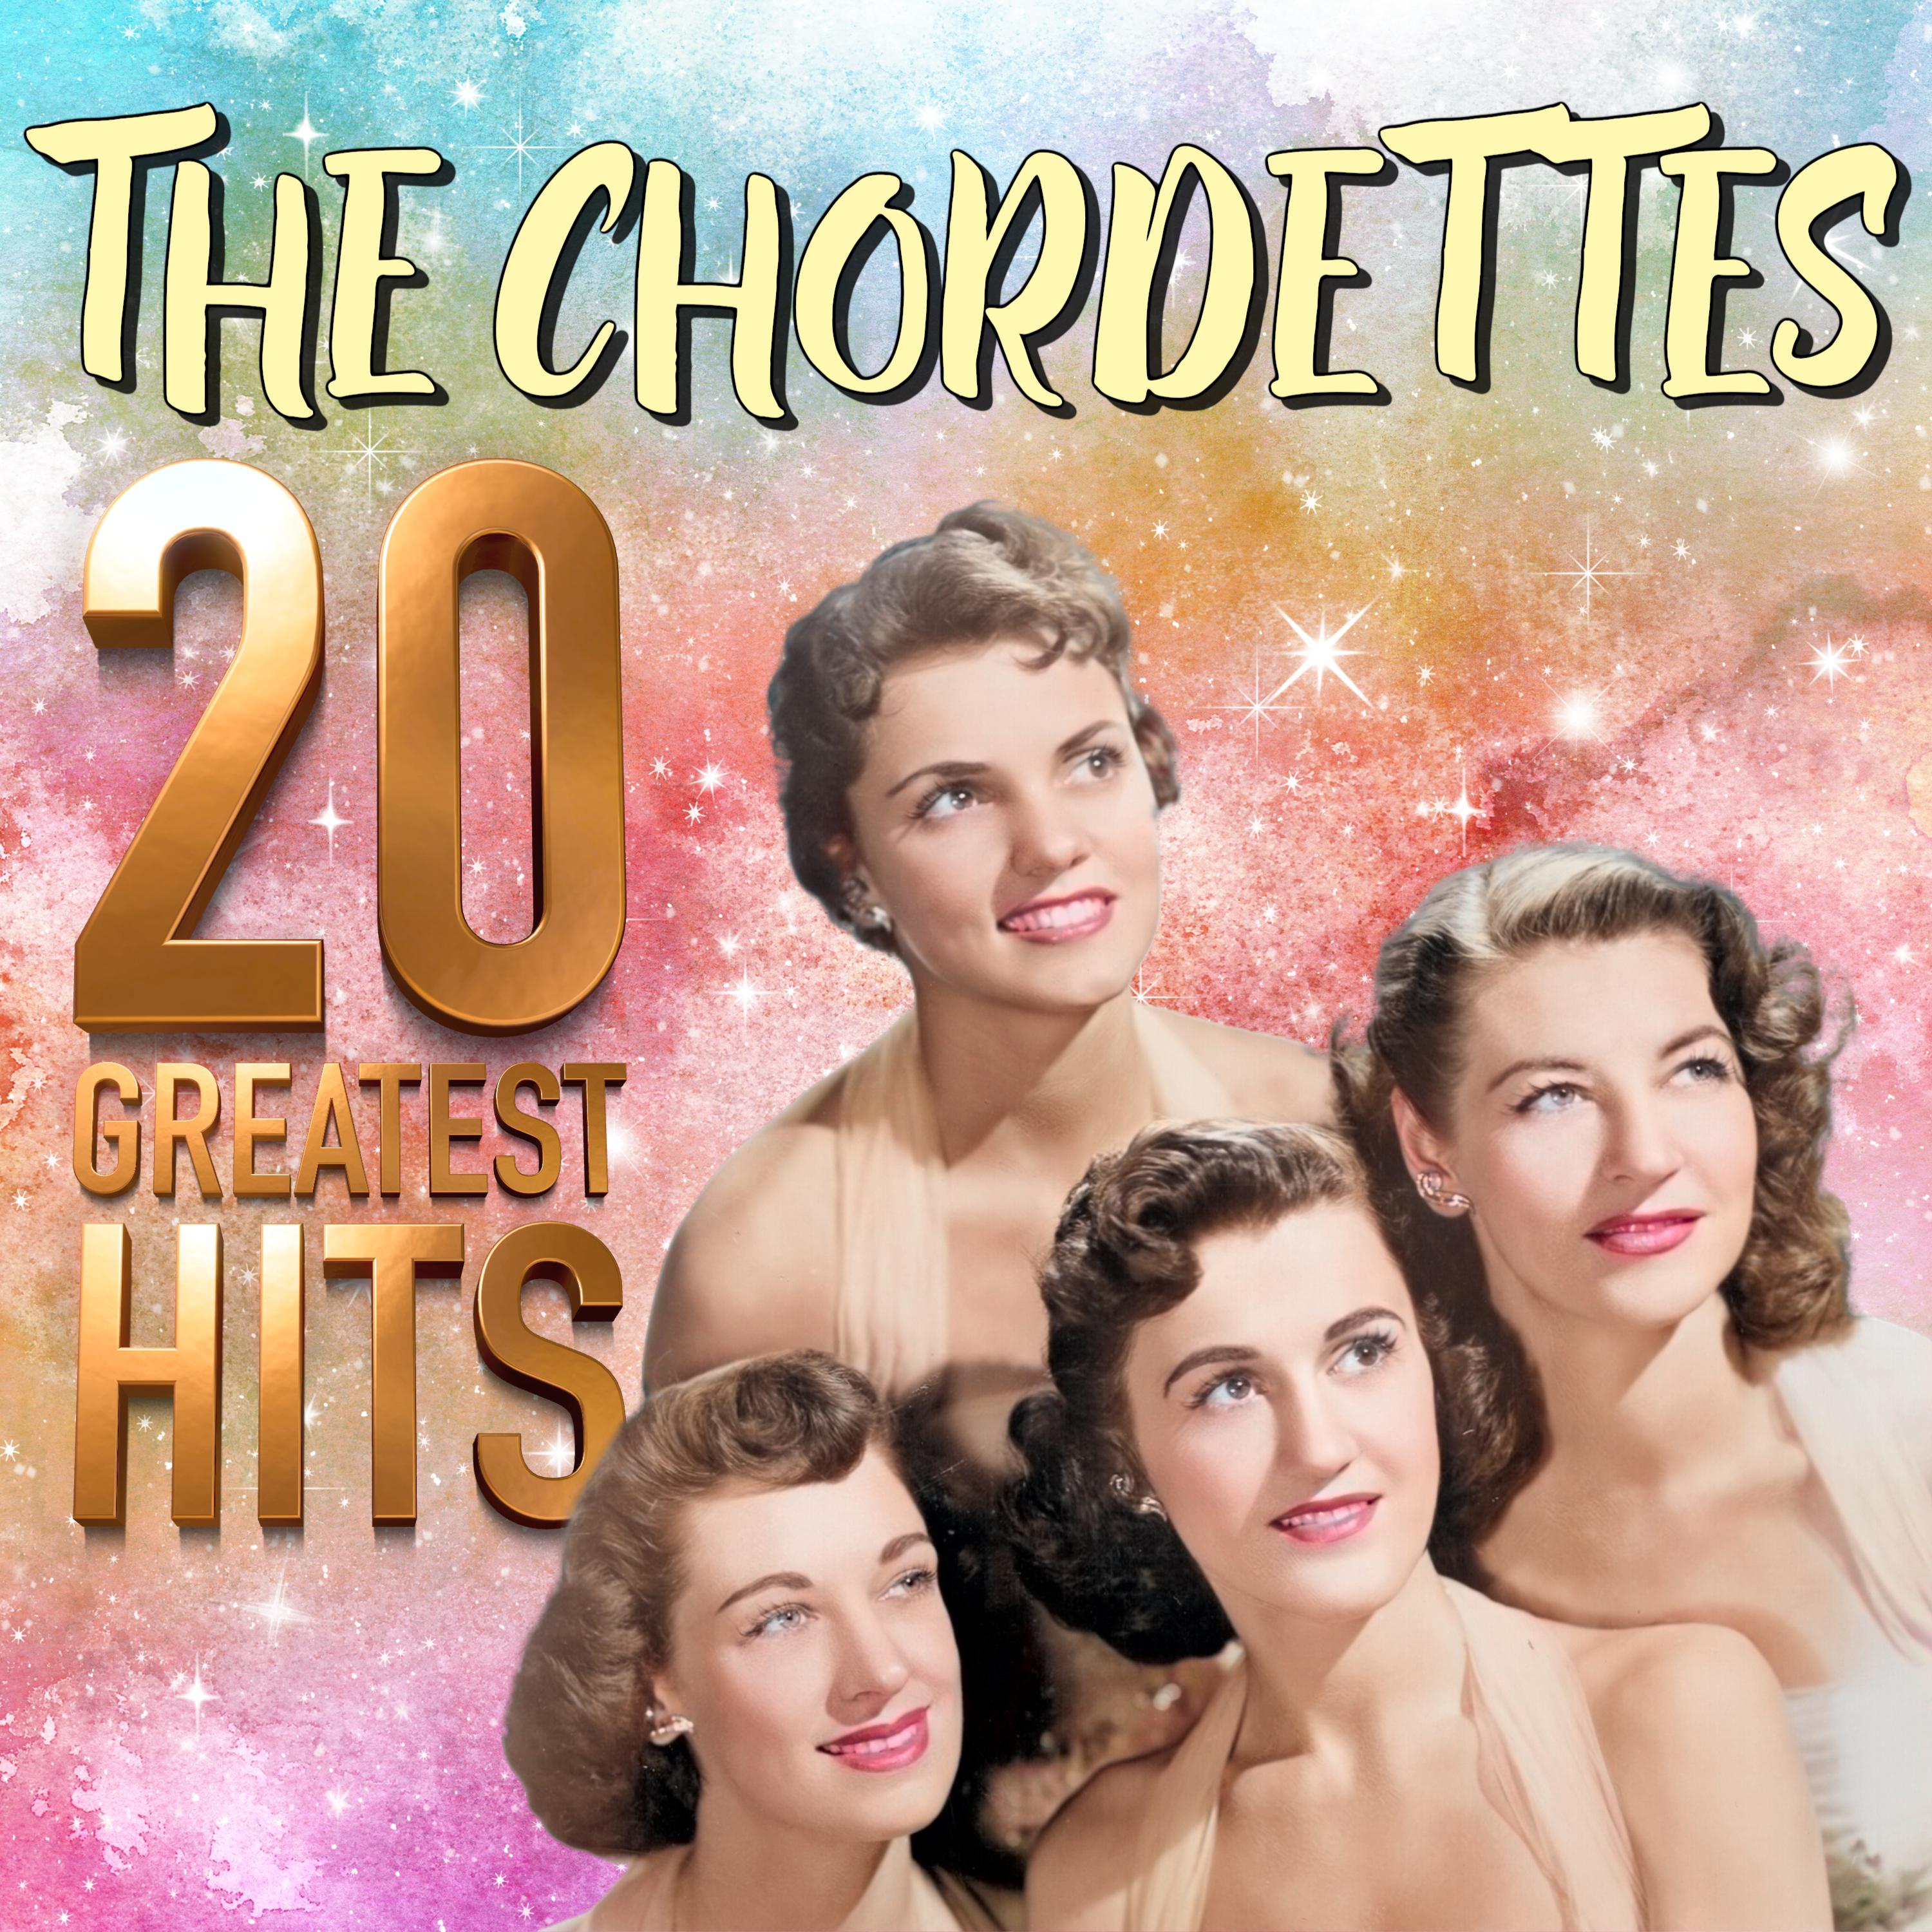 The Chordettes - Come Home to My Arms